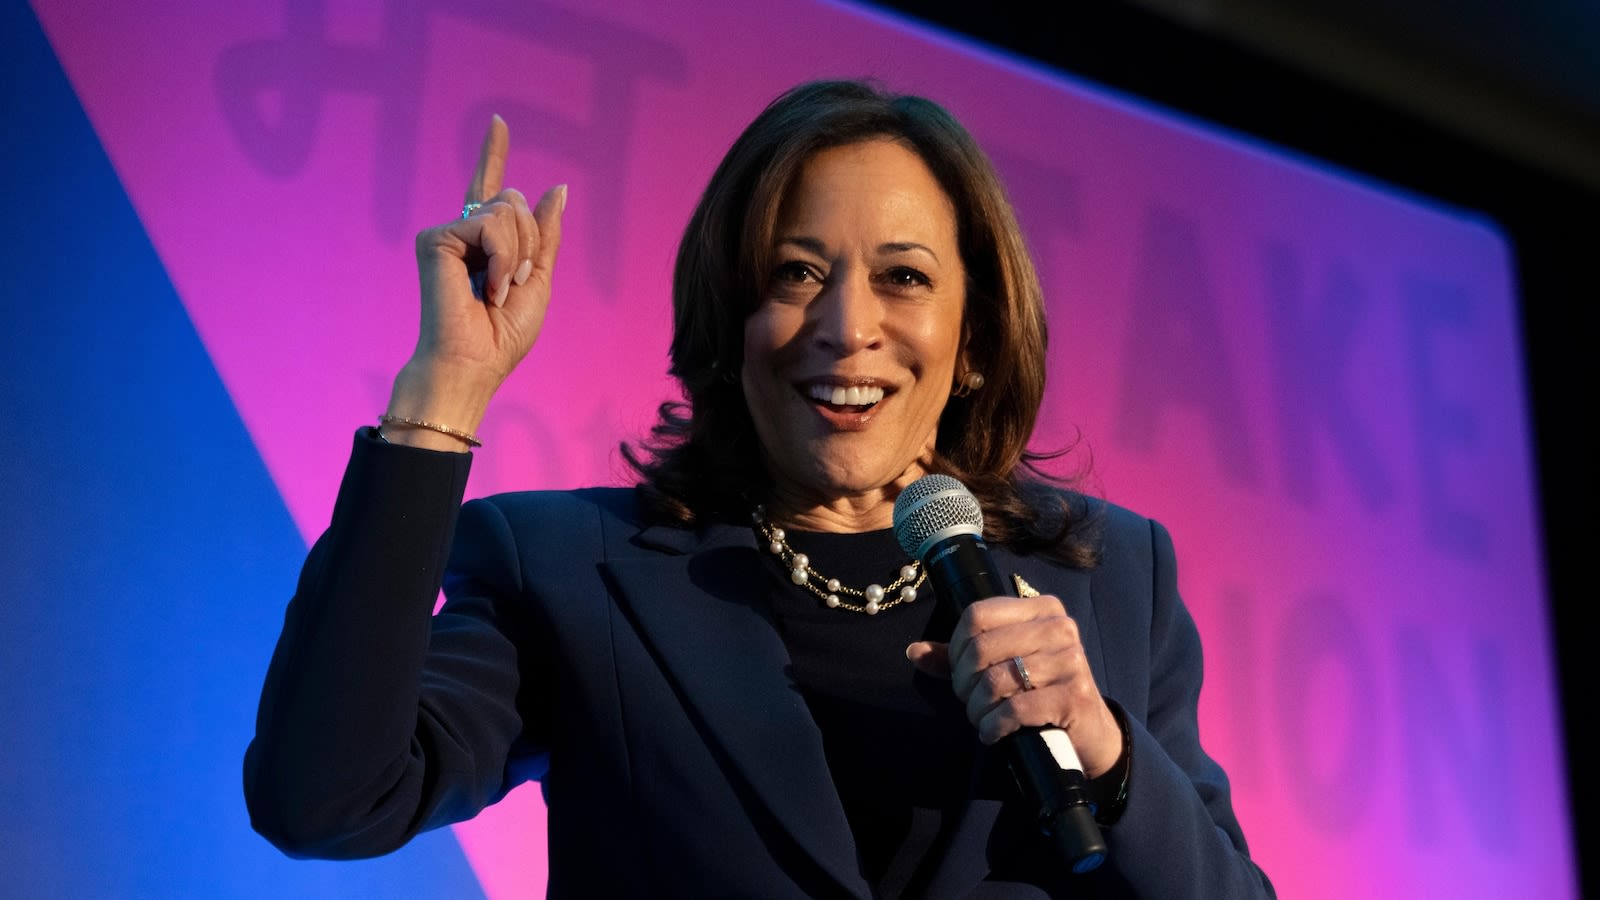 Harris accepts debate invite from CBS News to face off with Trump's VP pick this summer